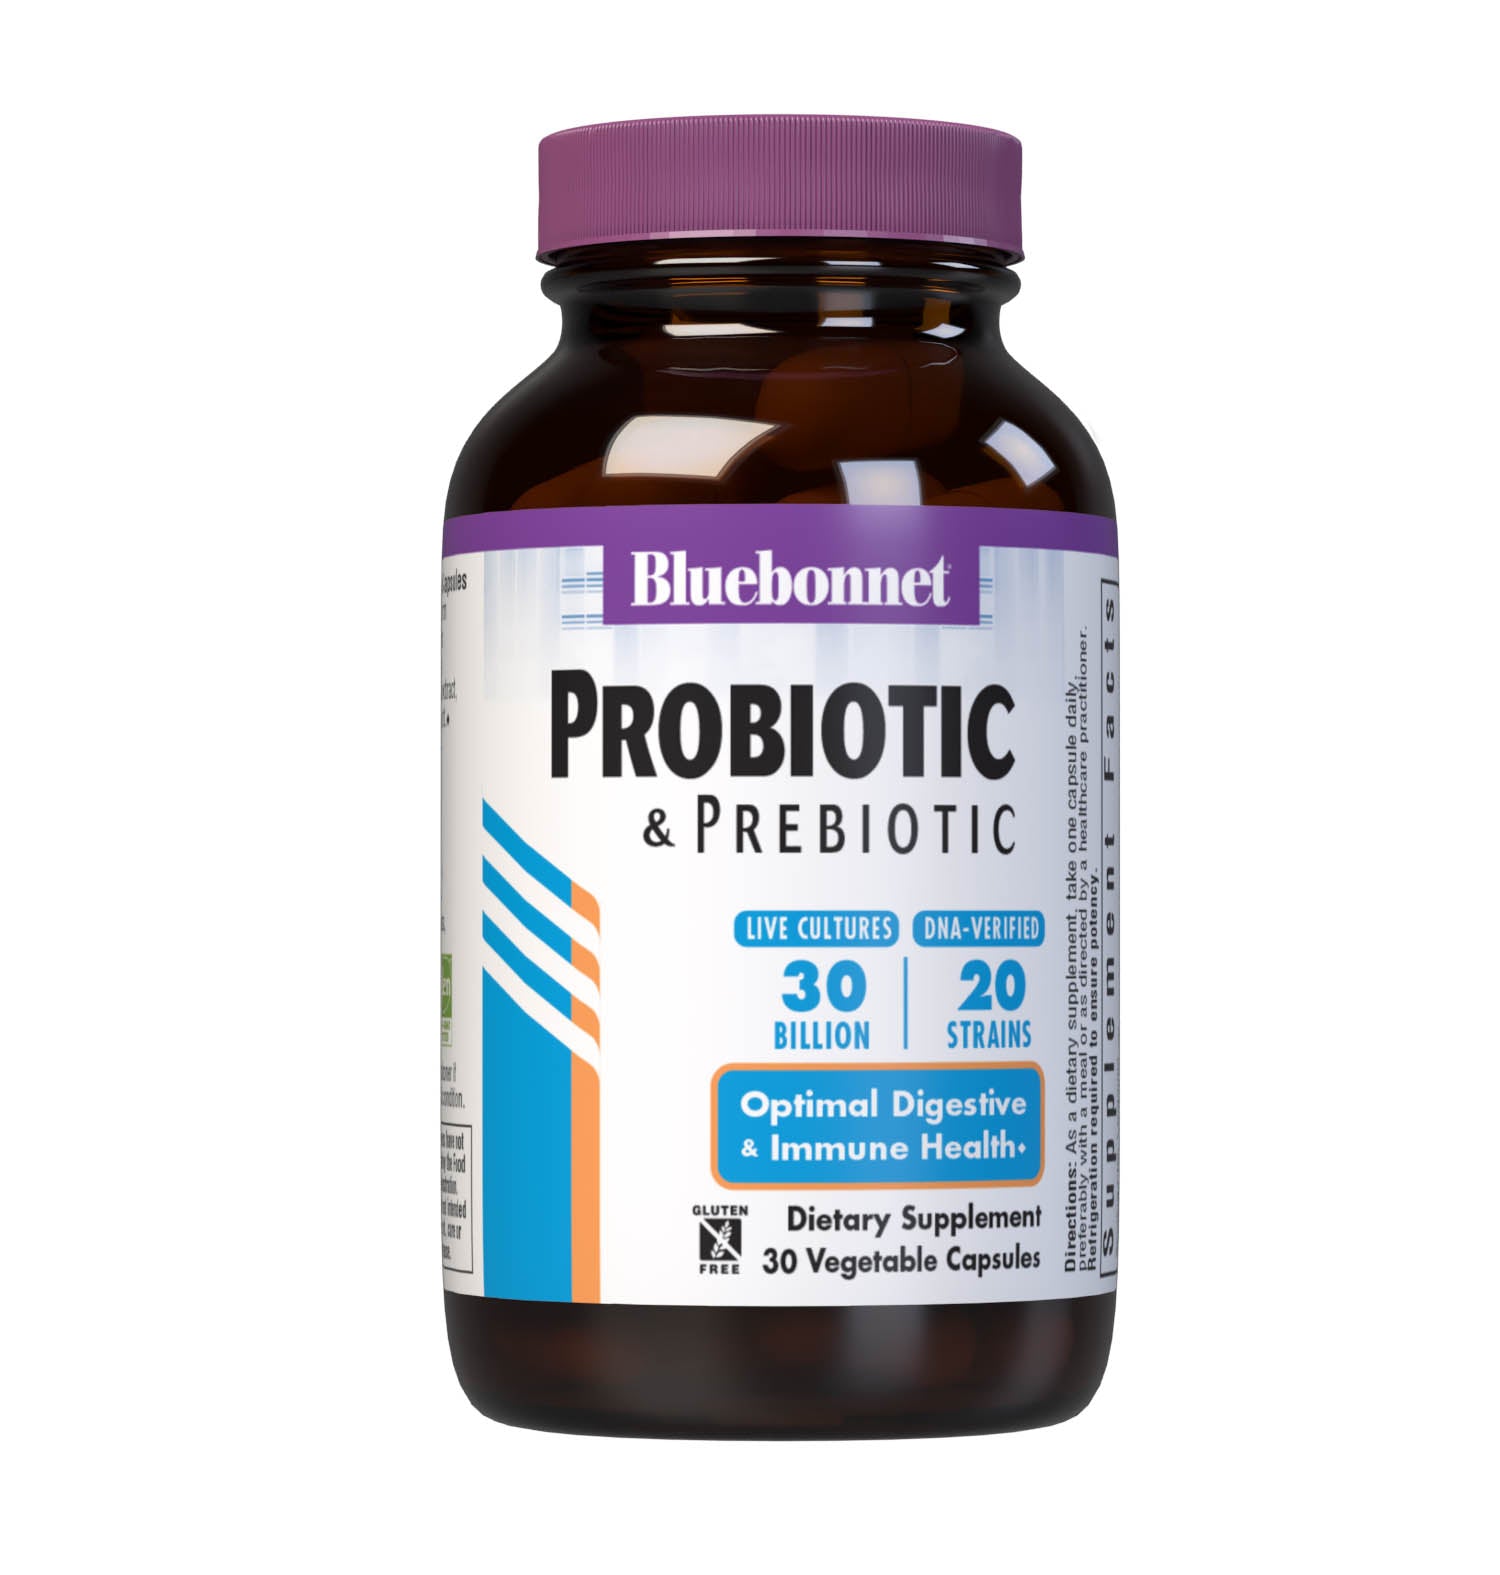 Bluebonnet’s Probiotic & Prebiotic 30 Vegetable Capsules are formulated with 30 billion viable cultures from 20 DNA-verified, scientifically supported strains. This unique, science-based probiotic formula includes the prebiotic inulin from chicory root extract, to assist the growth of friendly bacterium in the gut. #size_30 count